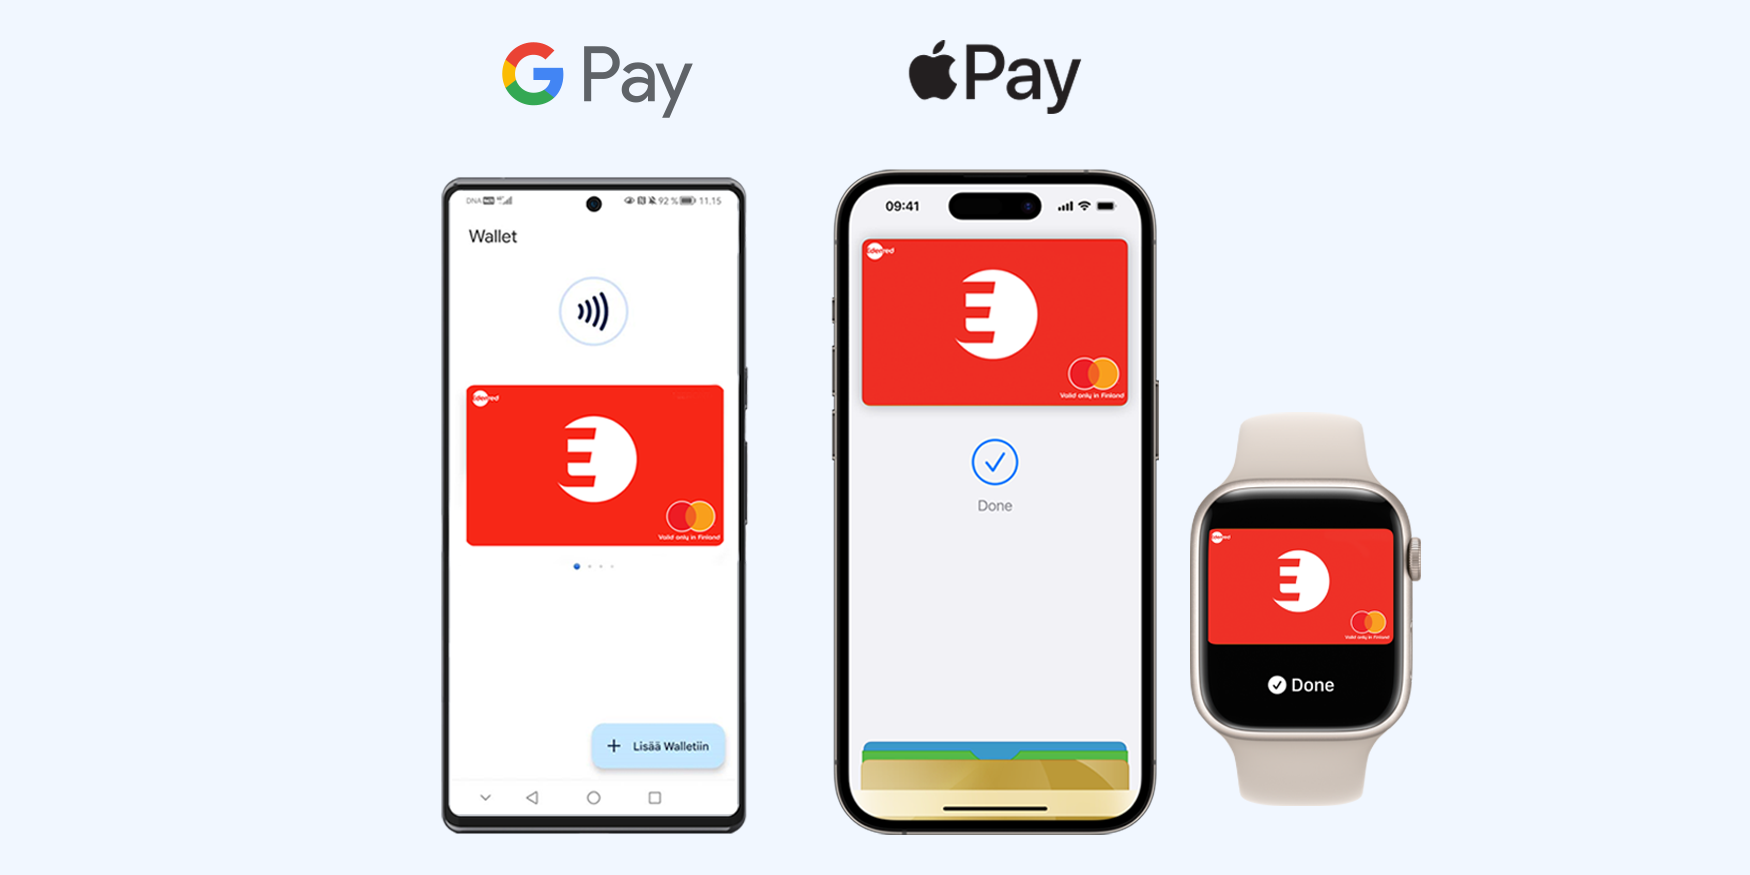 All Edenred benefits in Apple Pay and Google pay, picture of Pixel phone, iphone and apple watch